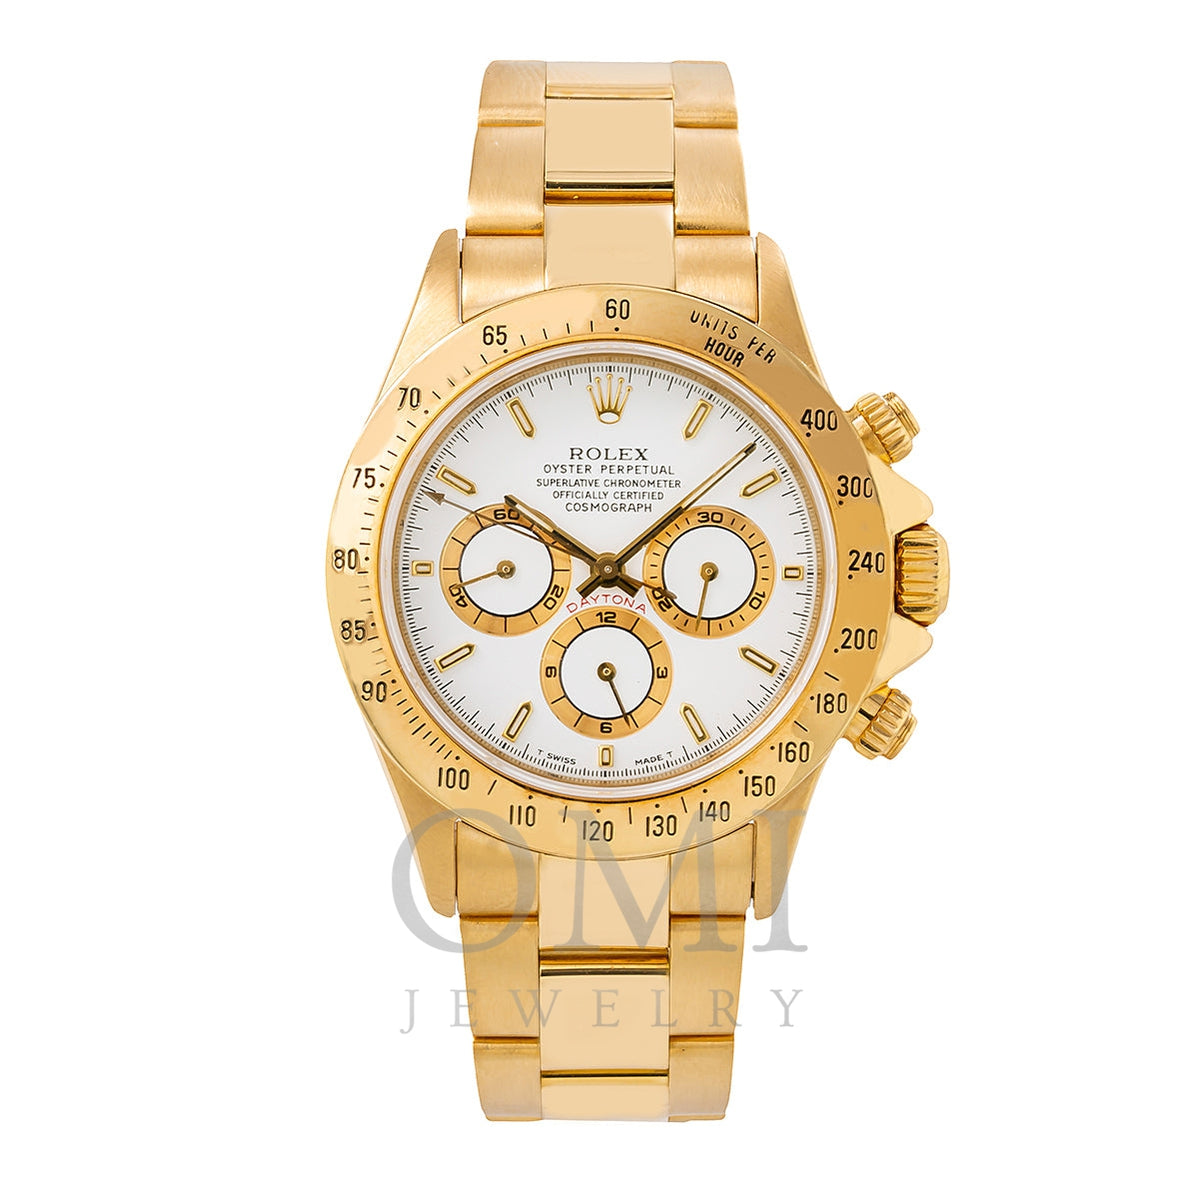 Land Perth Ikke vigtigt Rolex Daytona 16528 White Dial 40MM Yellow Gold Bracelet - OMI Jewelry